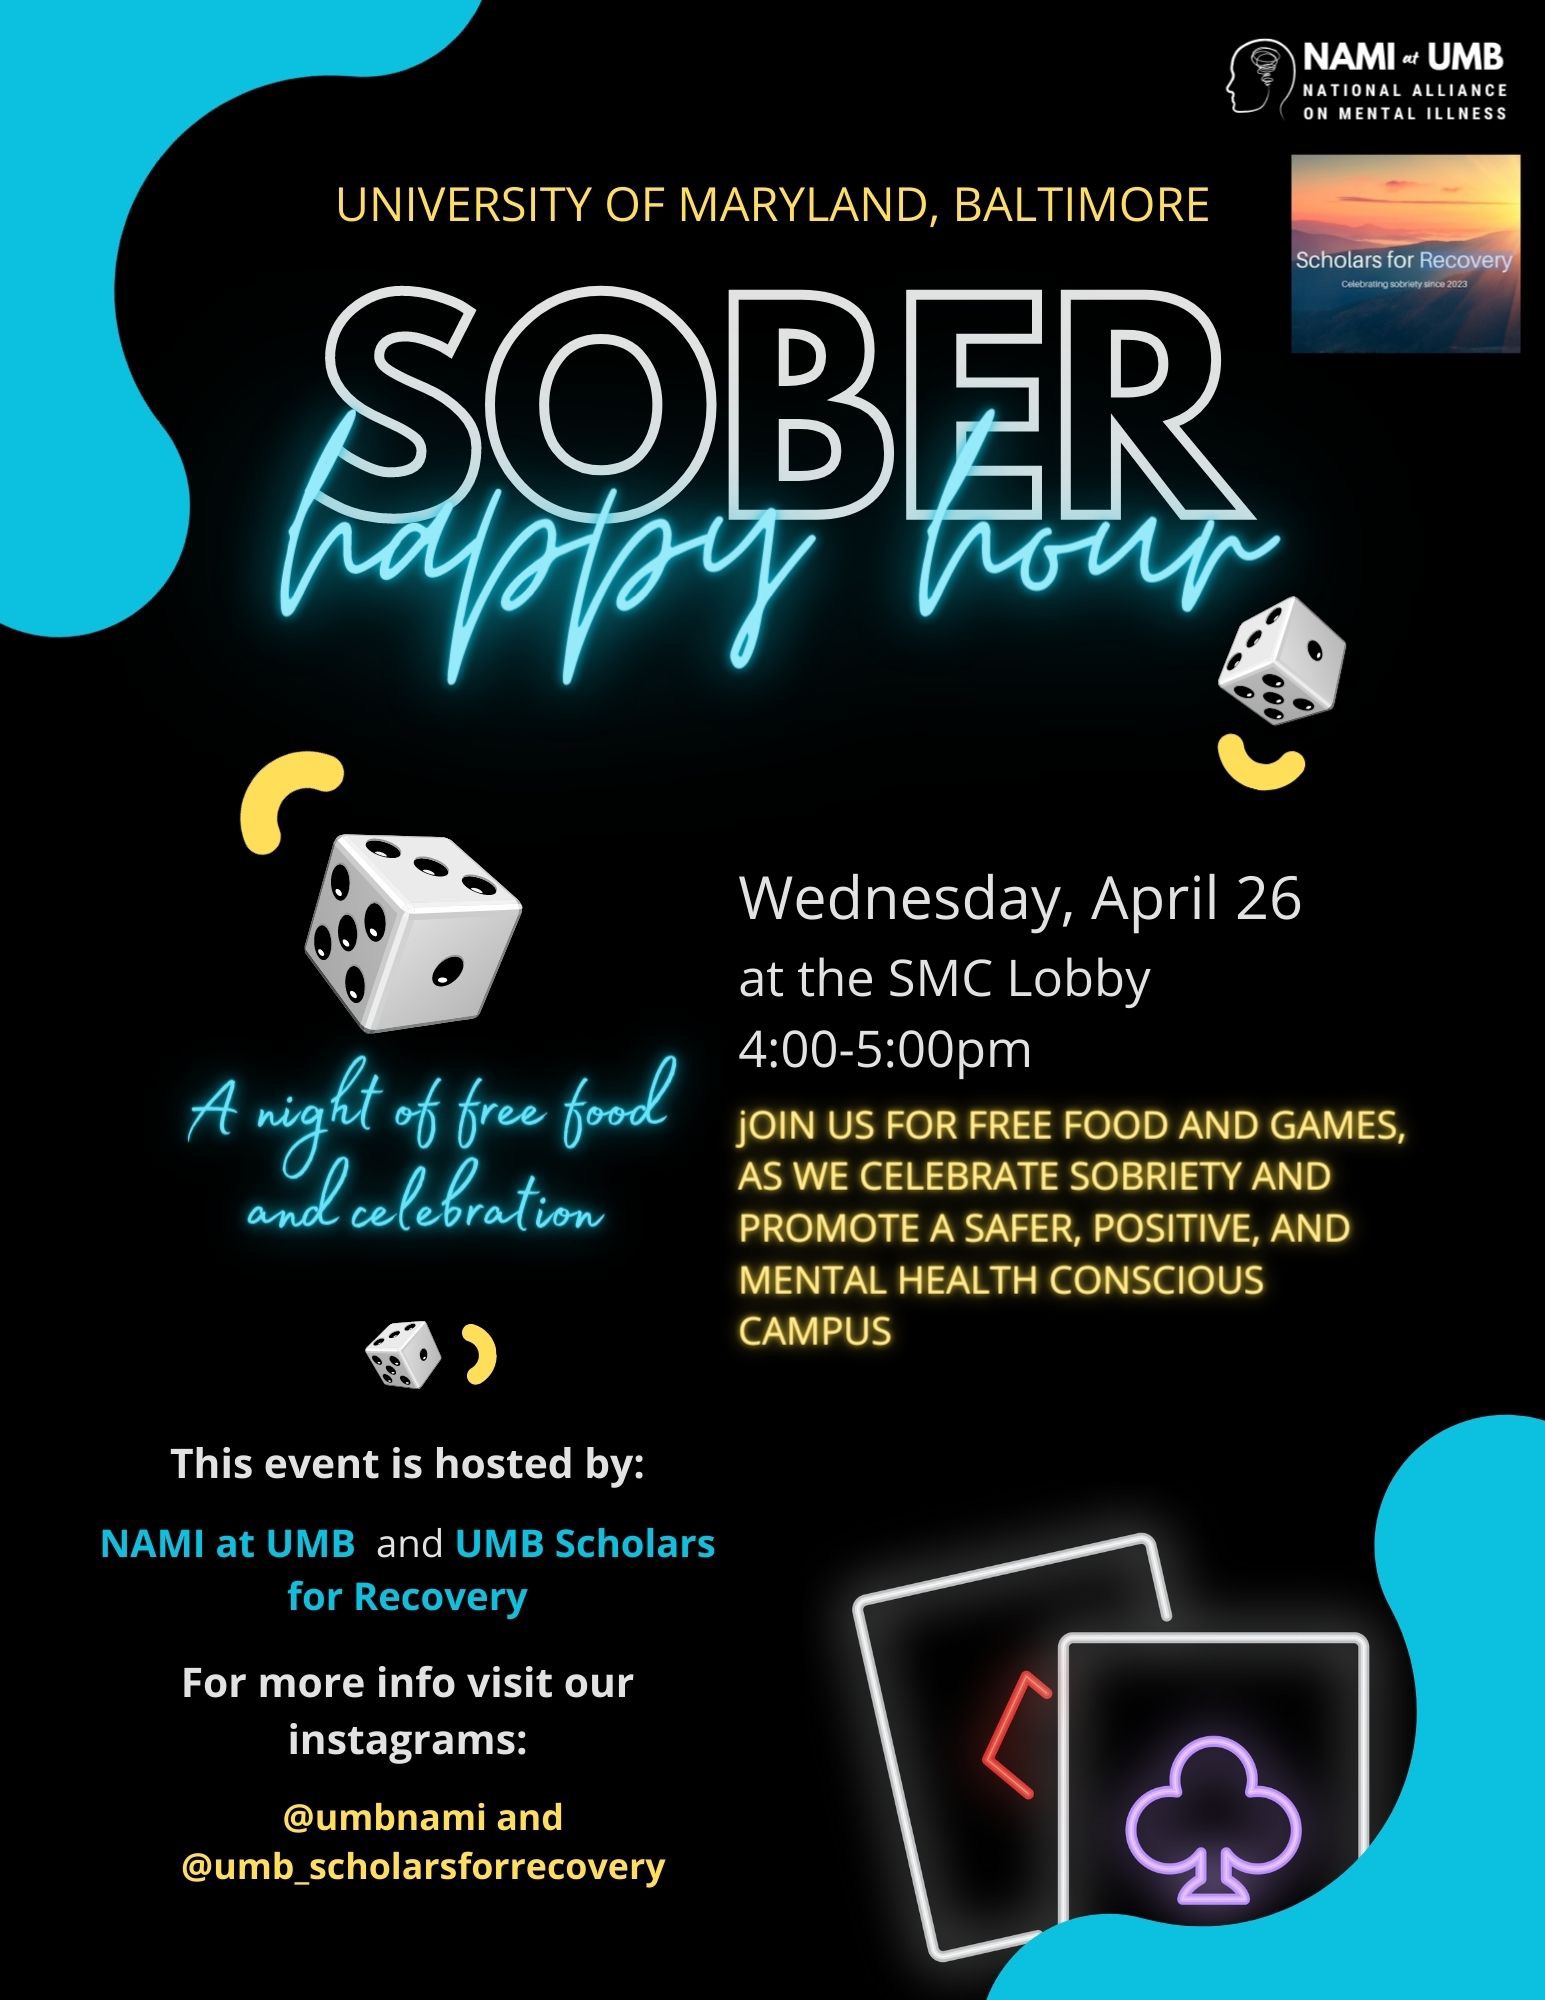 Sober Happy Hour - Wednesday April 26 at the SMC Lobby from 4:00pm - 5:00pm. Join us for free food and games, as we celebrate sobriety and promote a safer, positive, and mental health conscious campus